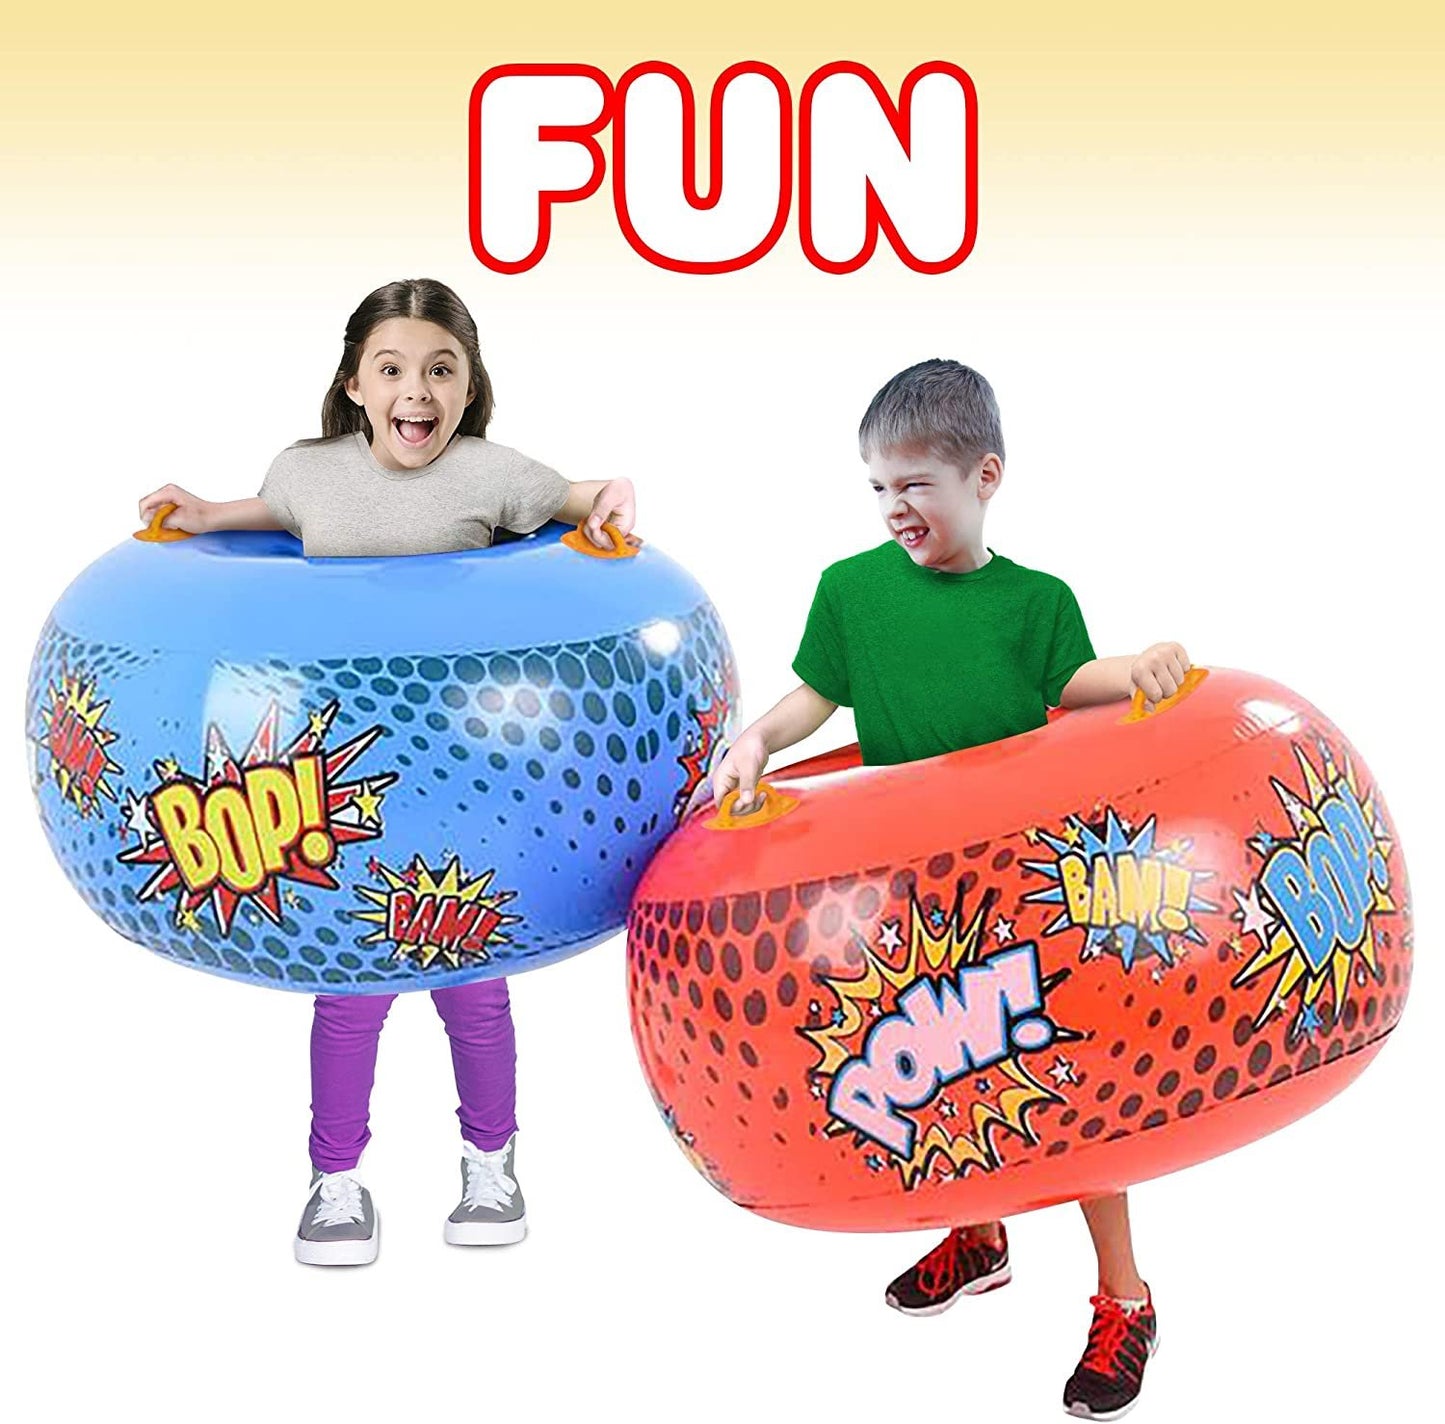 ArtCreativity Inflatable Body Bumper Set for Kids - Pack of 2 - Colorful Bump Ball Toys with Handles - Great Summer Game, Fun Birthday Party Activity, Gift Idea for Boys and Girls - Red and Blue